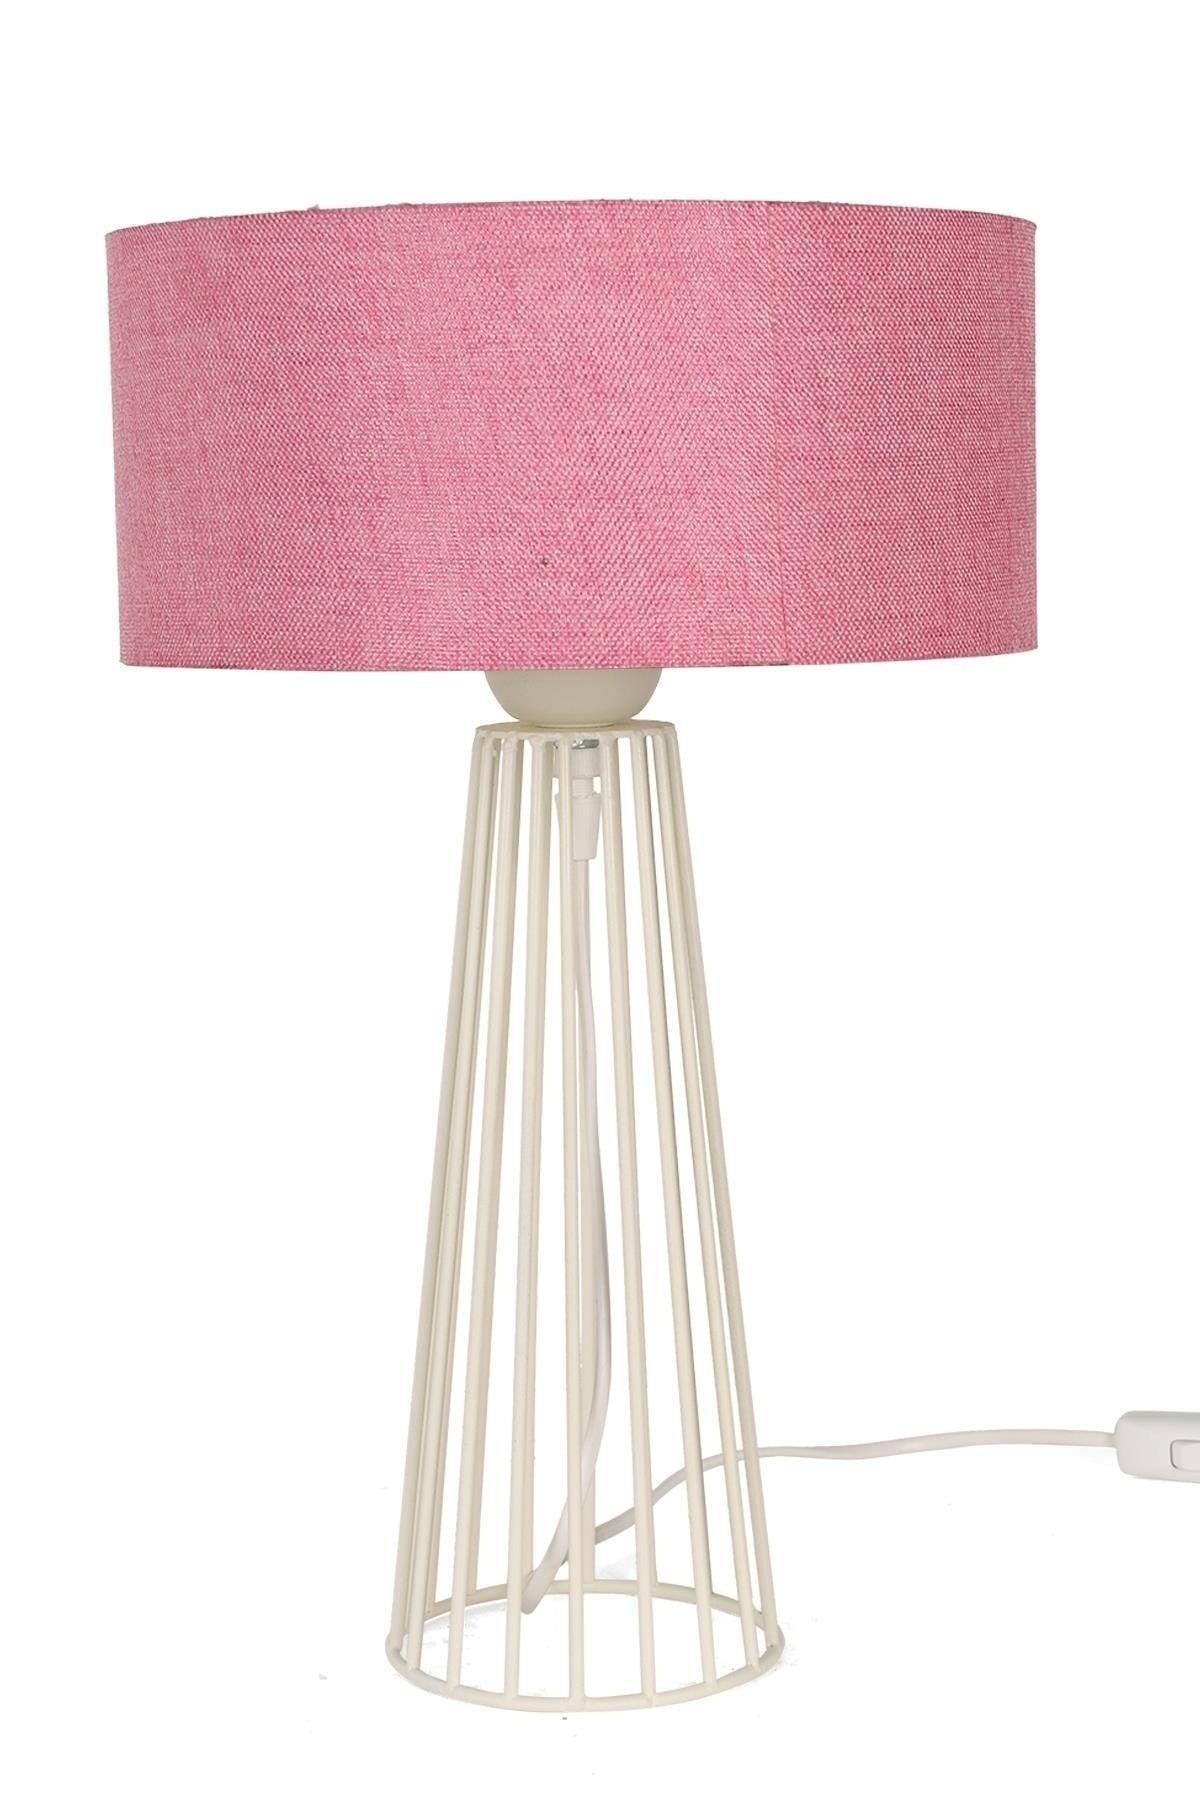 Philippine Table Lamp White Pink Hat - Swordslife